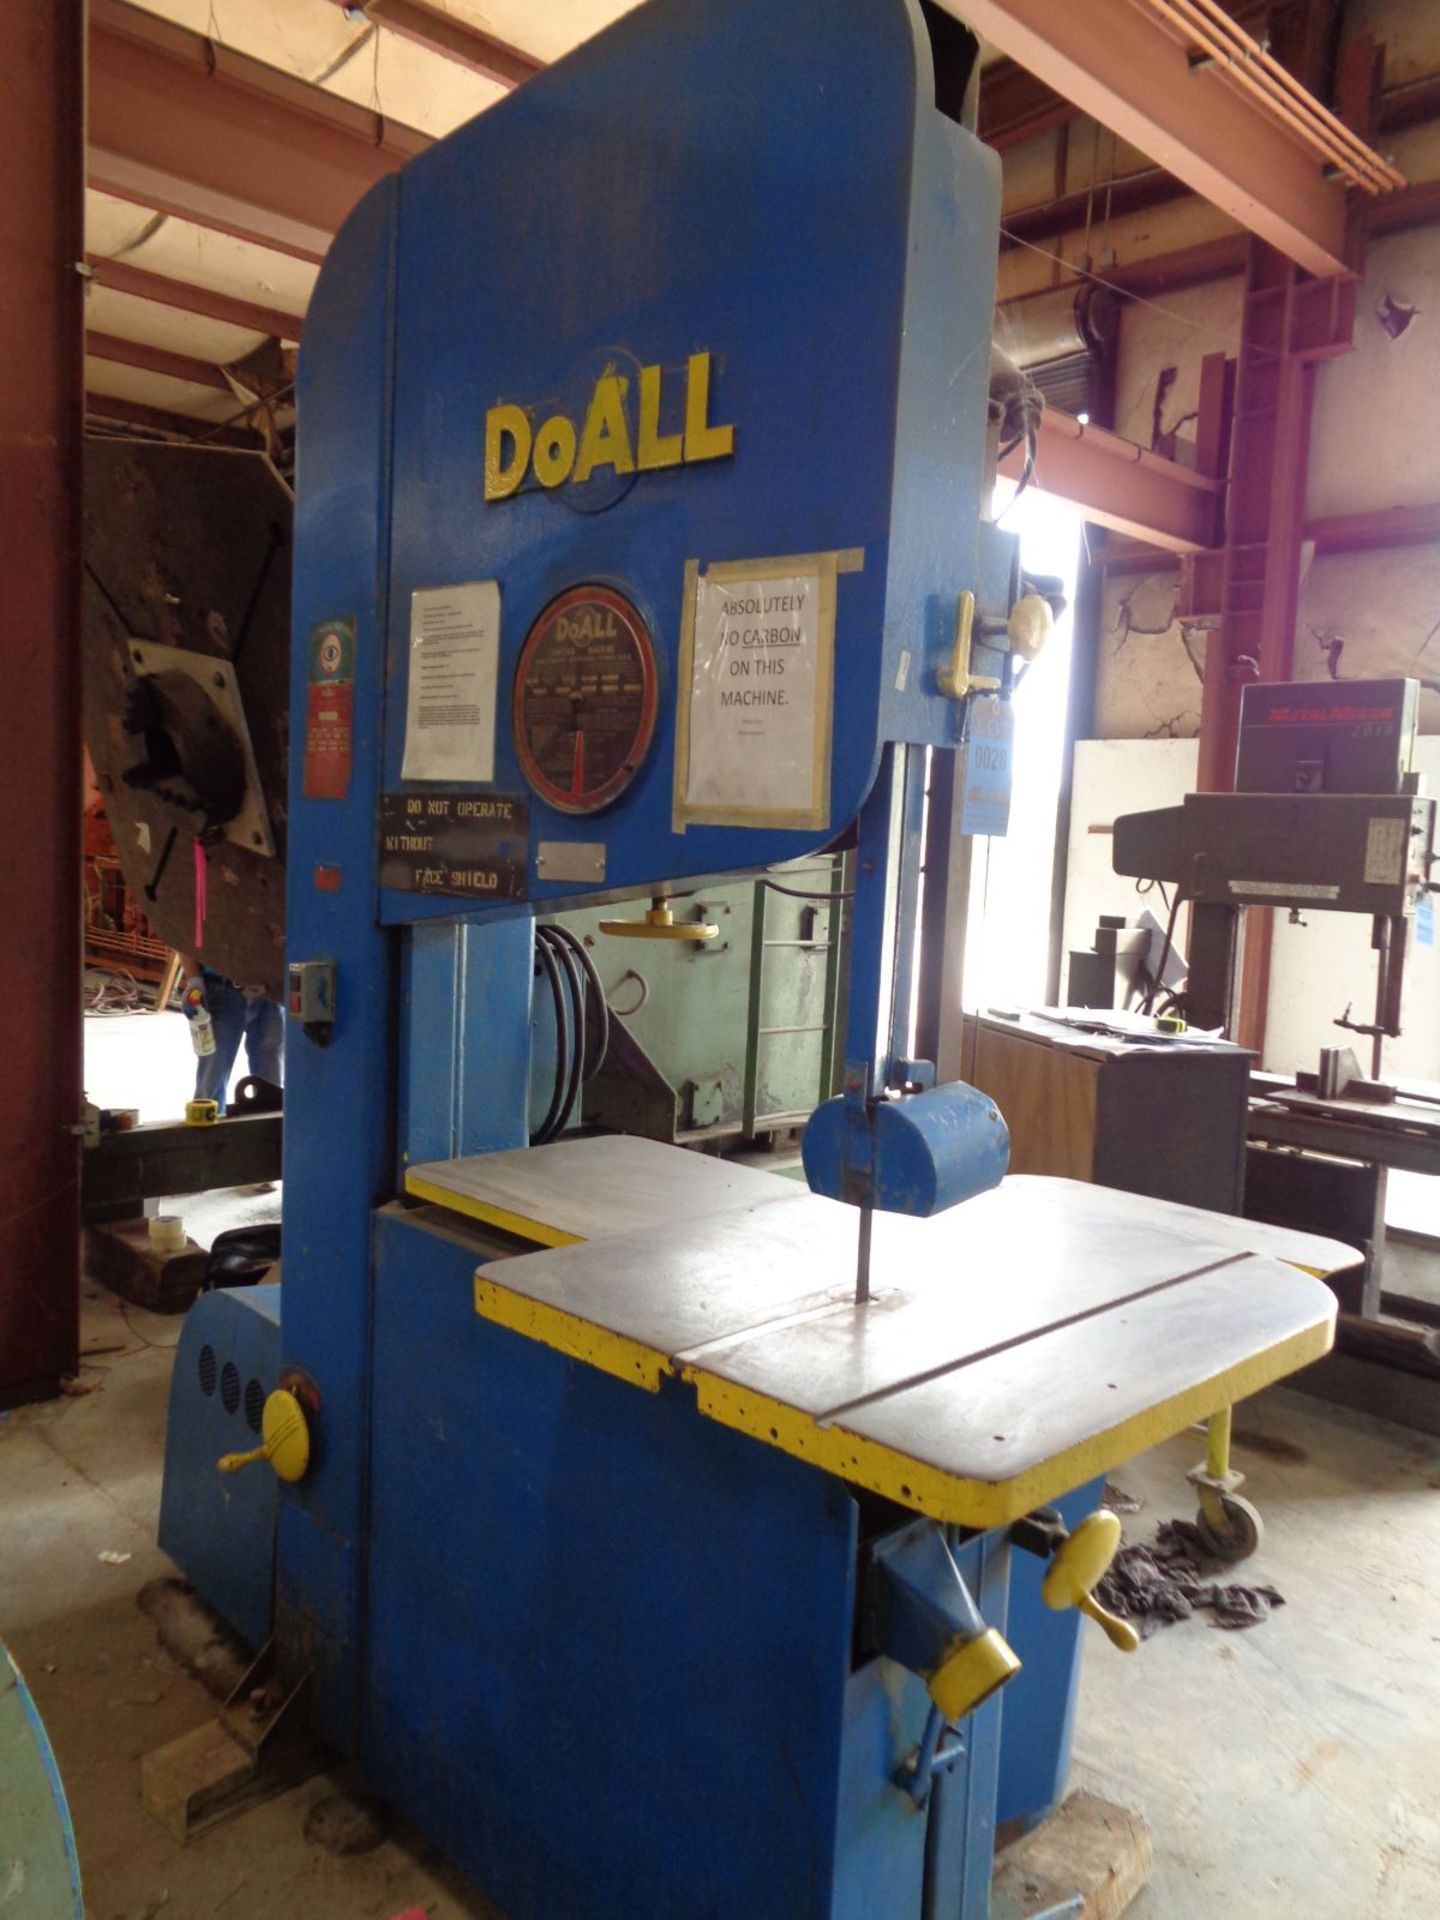 36" DOALL MODEL ZV-3620 VERTICAL BAND SAW; S/N 265-72161, 36" X 30" WORK TABLE, 1" WIDE BLADE, 3-